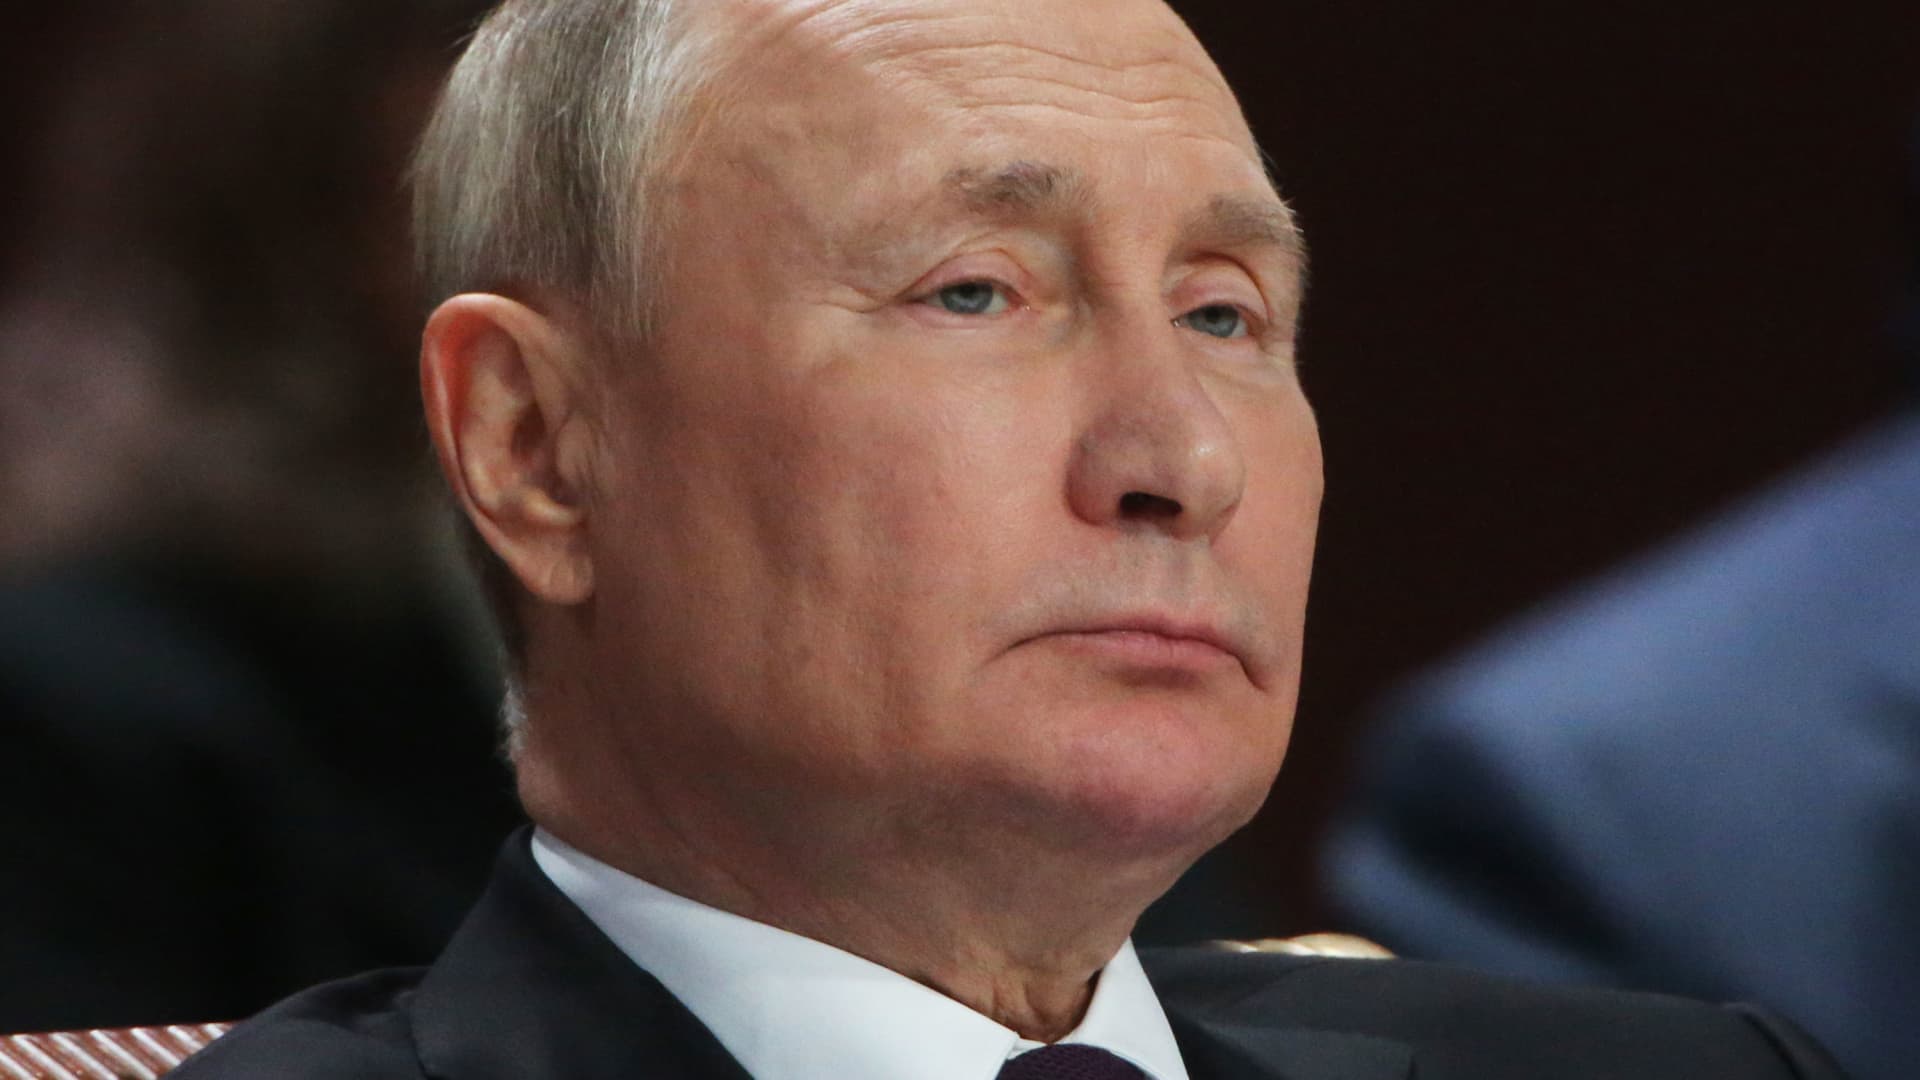 ‘Losing is not an option’: Putin is ‘desperate’ to avoid defeat in Ukraine as an..